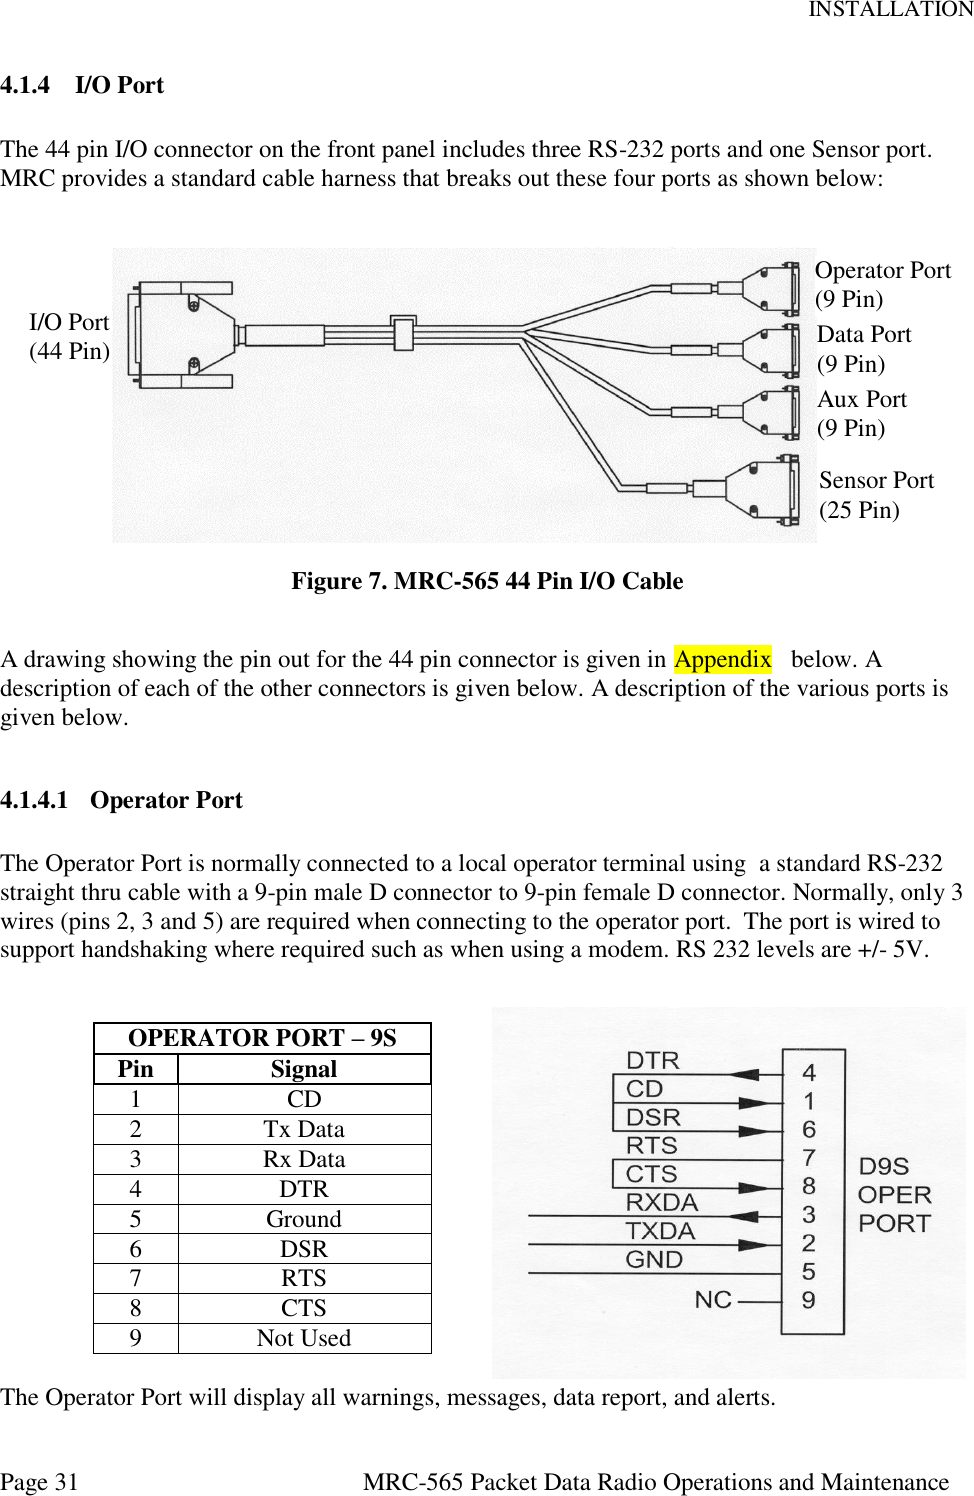 INSTALLATION Page 31  MRC-565 Packet Data Radio Operations and Maintenance 4.1.4 I/O Port  The 44 pin I/O connector on the front panel includes three RS-232 ports and one Sensor port.  MRC provides a standard cable harness that breaks out these four ports as shown below:           MRC-565 I/O Port Cable   Figure 7. MRC-565 44 Pin I/O Cable  A drawing showing the pin out for the 44 pin connector is given in Appendix   below. A description of each of the other connectors is given below. A description of the various ports is given below.  4.1.4.1 Operator Port  The Operator Port is normally connected to a local operator terminal using  a standard RS-232 straight thru cable with a 9-pin male D connector to 9-pin female D connector. Normally, only 3 wires (pins 2, 3 and 5) are required when connecting to the operator port.  The port is wired to support handshaking where required such as when using a modem. RS 232 levels are +/- 5V.   OPERATOR PORT – 9S Pin Signal 1 CD  2 Tx Data  3 Rx Data  4 DTR  5 Ground 6 DSR 7 RTS  8 CTS  9 Not Used  The Operator Port will display all warnings, messages, data report, and alerts. I/O Port (44 Pin) Operator Port (9 Pin) Aux Port (9 Pin) Data Port (9 Pin) Sensor Port (25 Pin) 